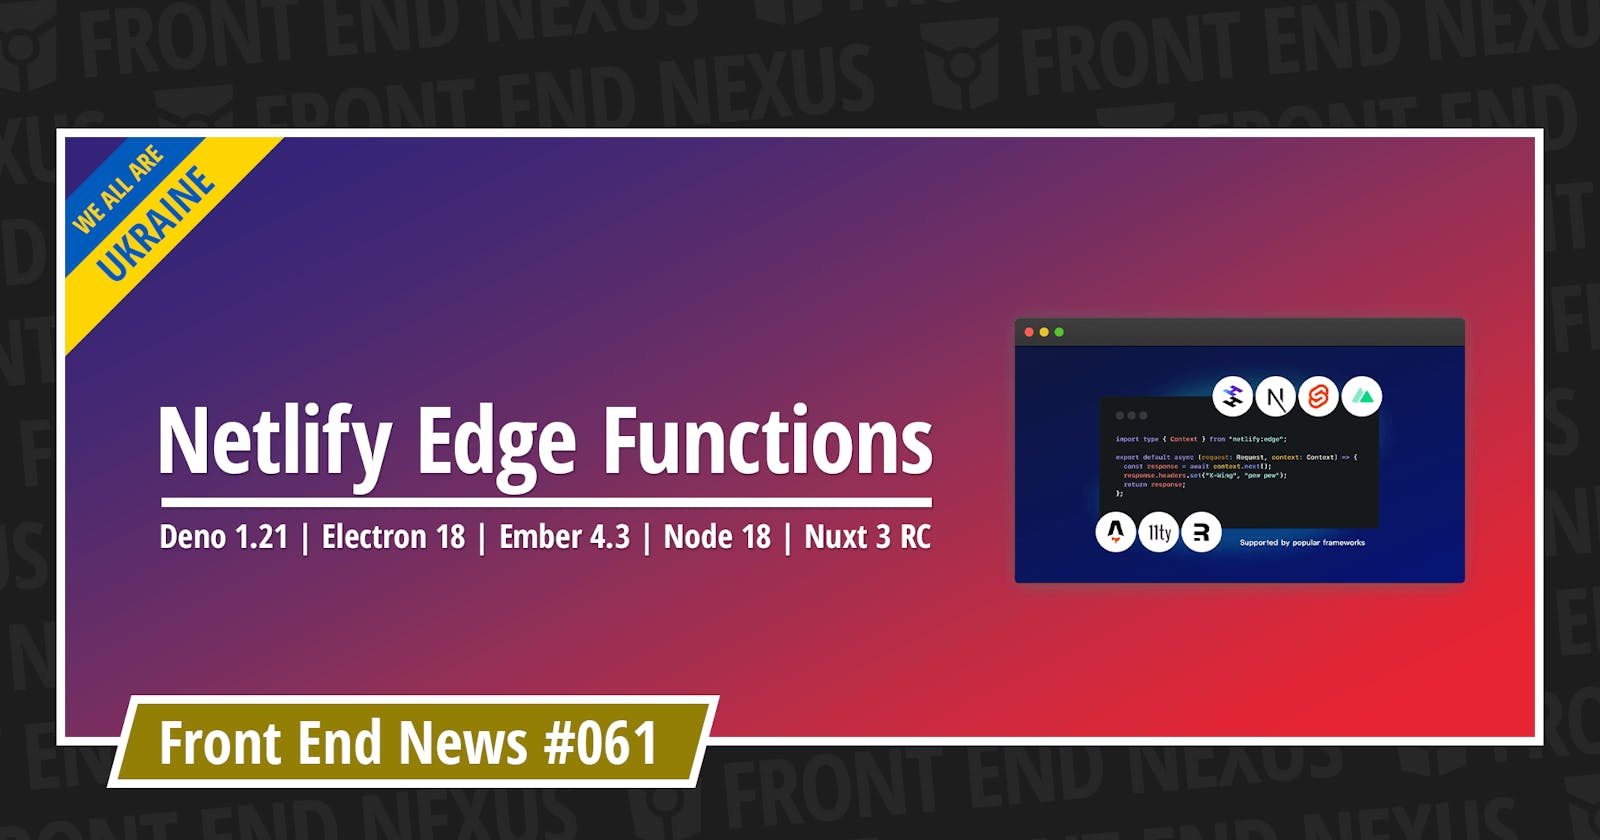 Functions, Deno 1.21, Electron 18, Ember 4.3, Node 18, Nuxt 3 RC, and more | Front End News #061